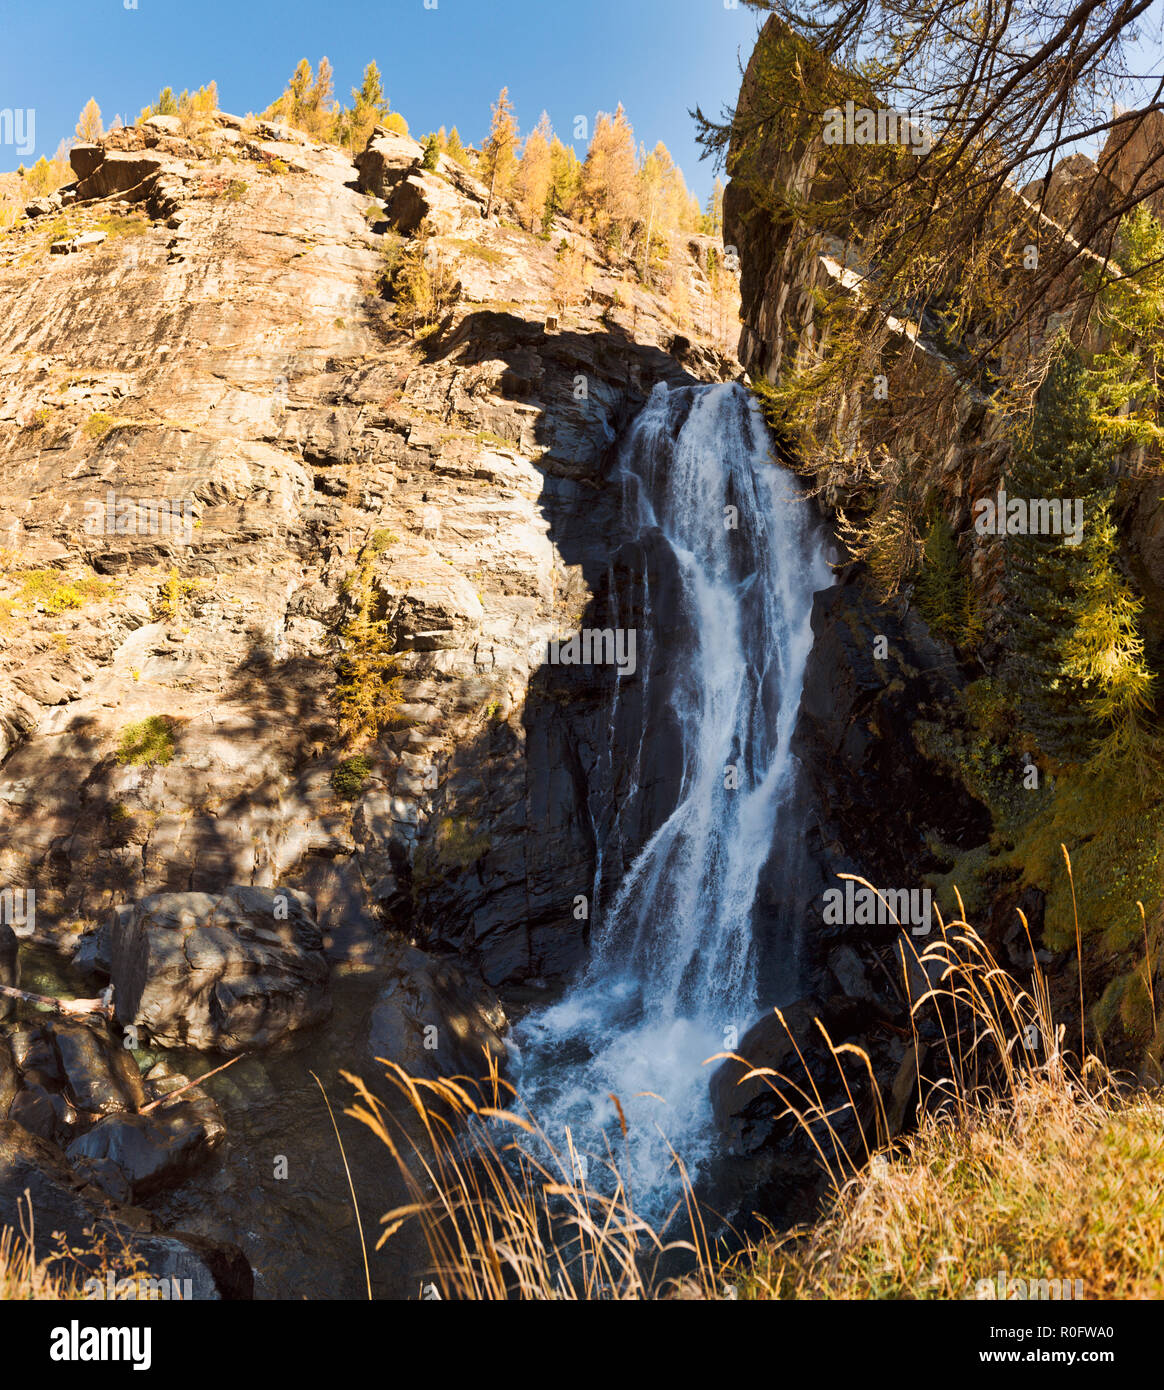 Wonderful waterfall in the forest in the mountains during the autumn season with light and shadows in the undergrowth Stock Photo